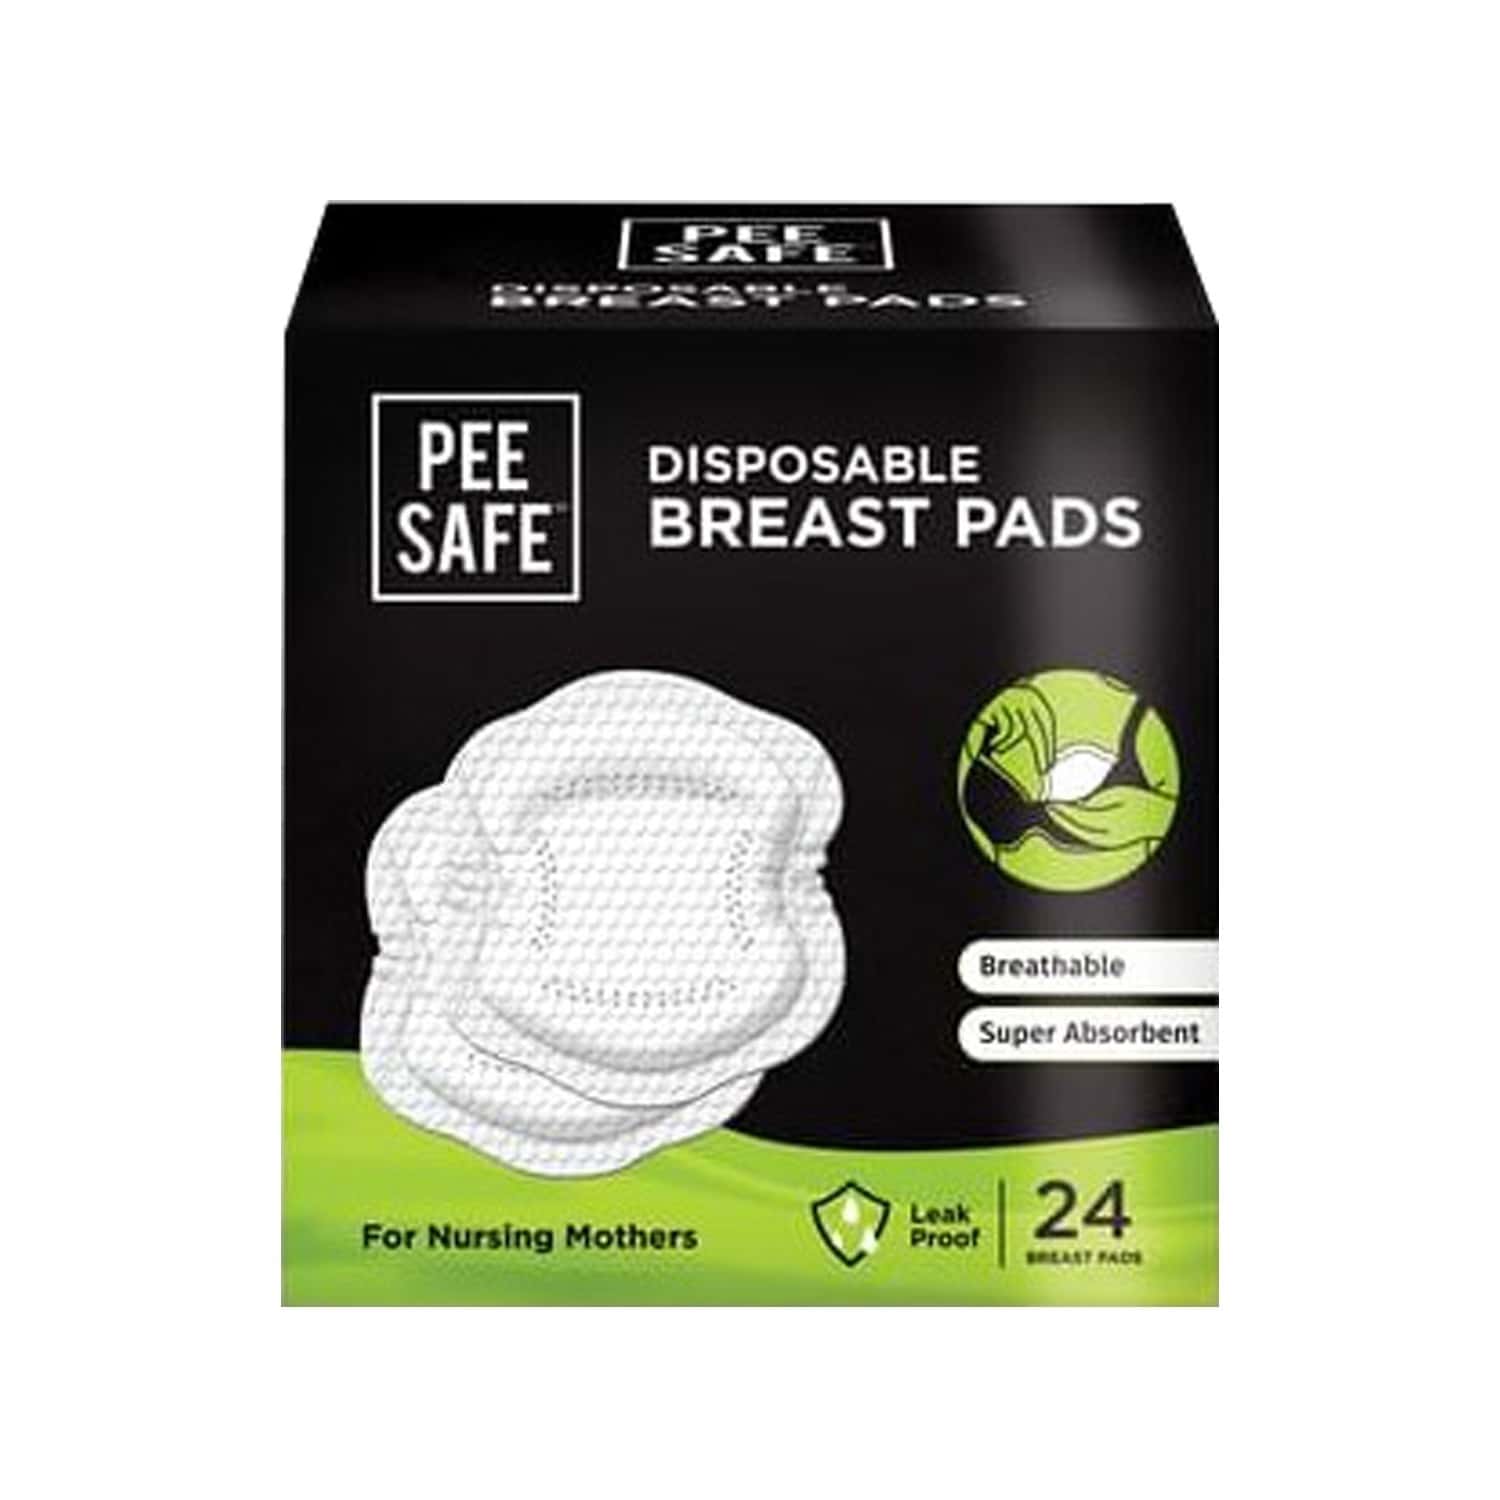 https://medanand.com/wp-content/uploads/2022/01/pee-safe-disposable-breast-pads-packet-of-24-2-1632776575.jpg